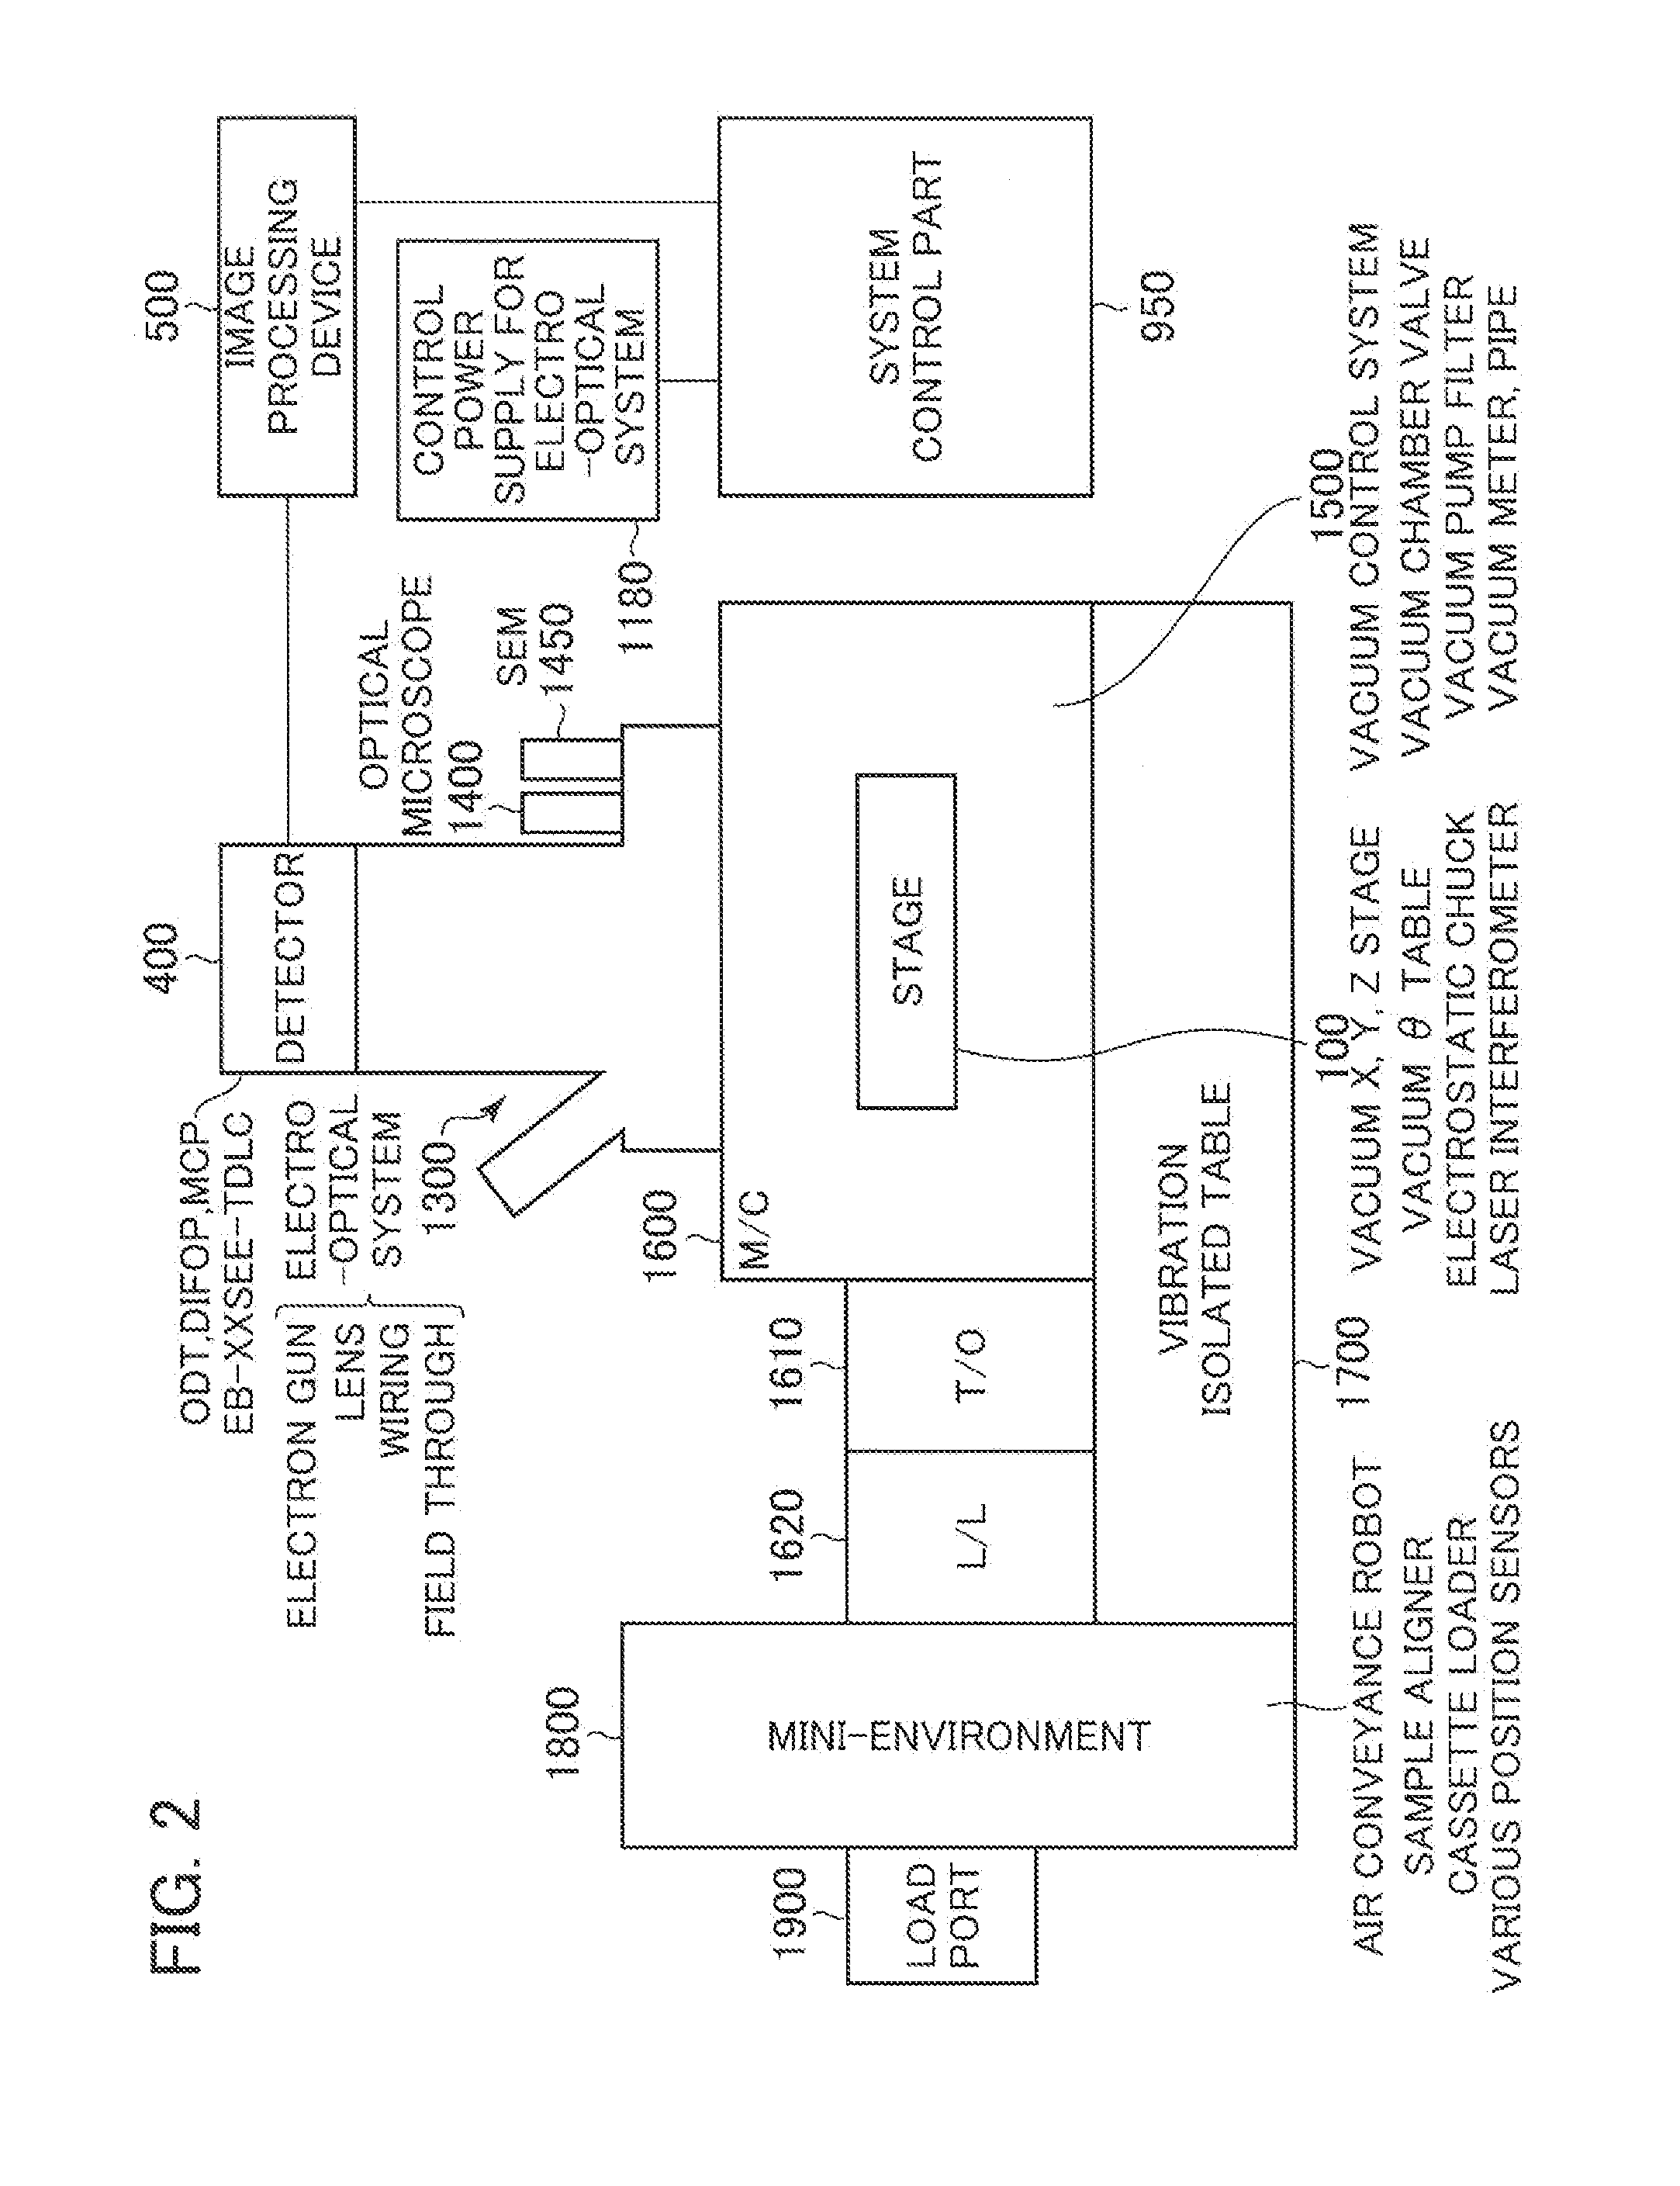 Electro-optical inspection apparatus and method with dust or particle collection function